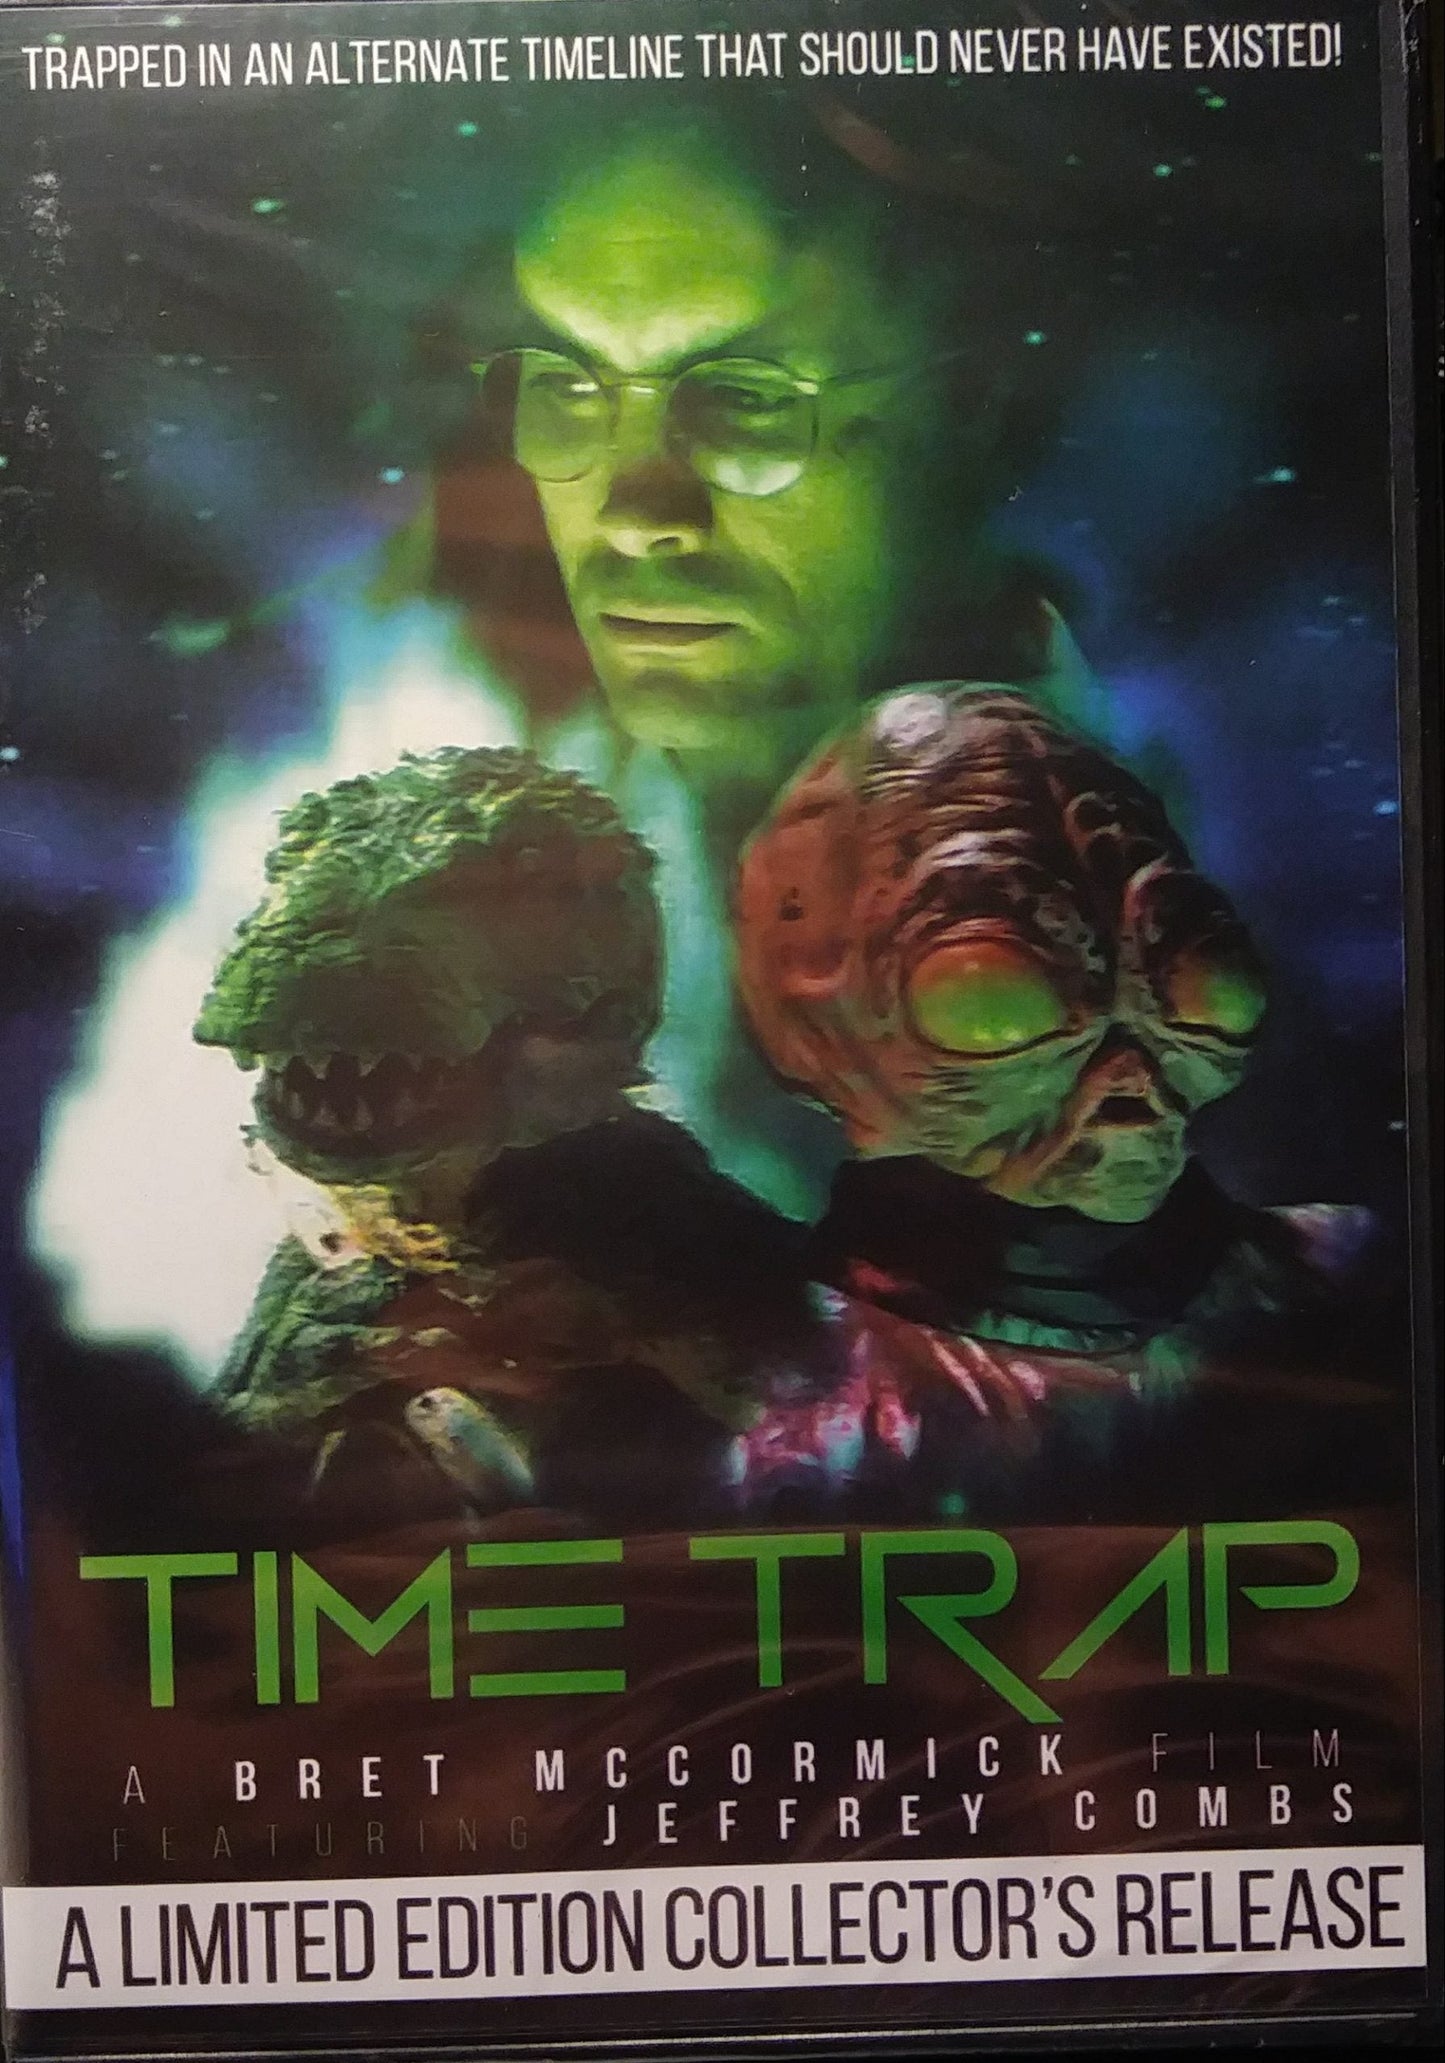 TIME TRAP Limited Edition DVD starring Jeffrey Combs